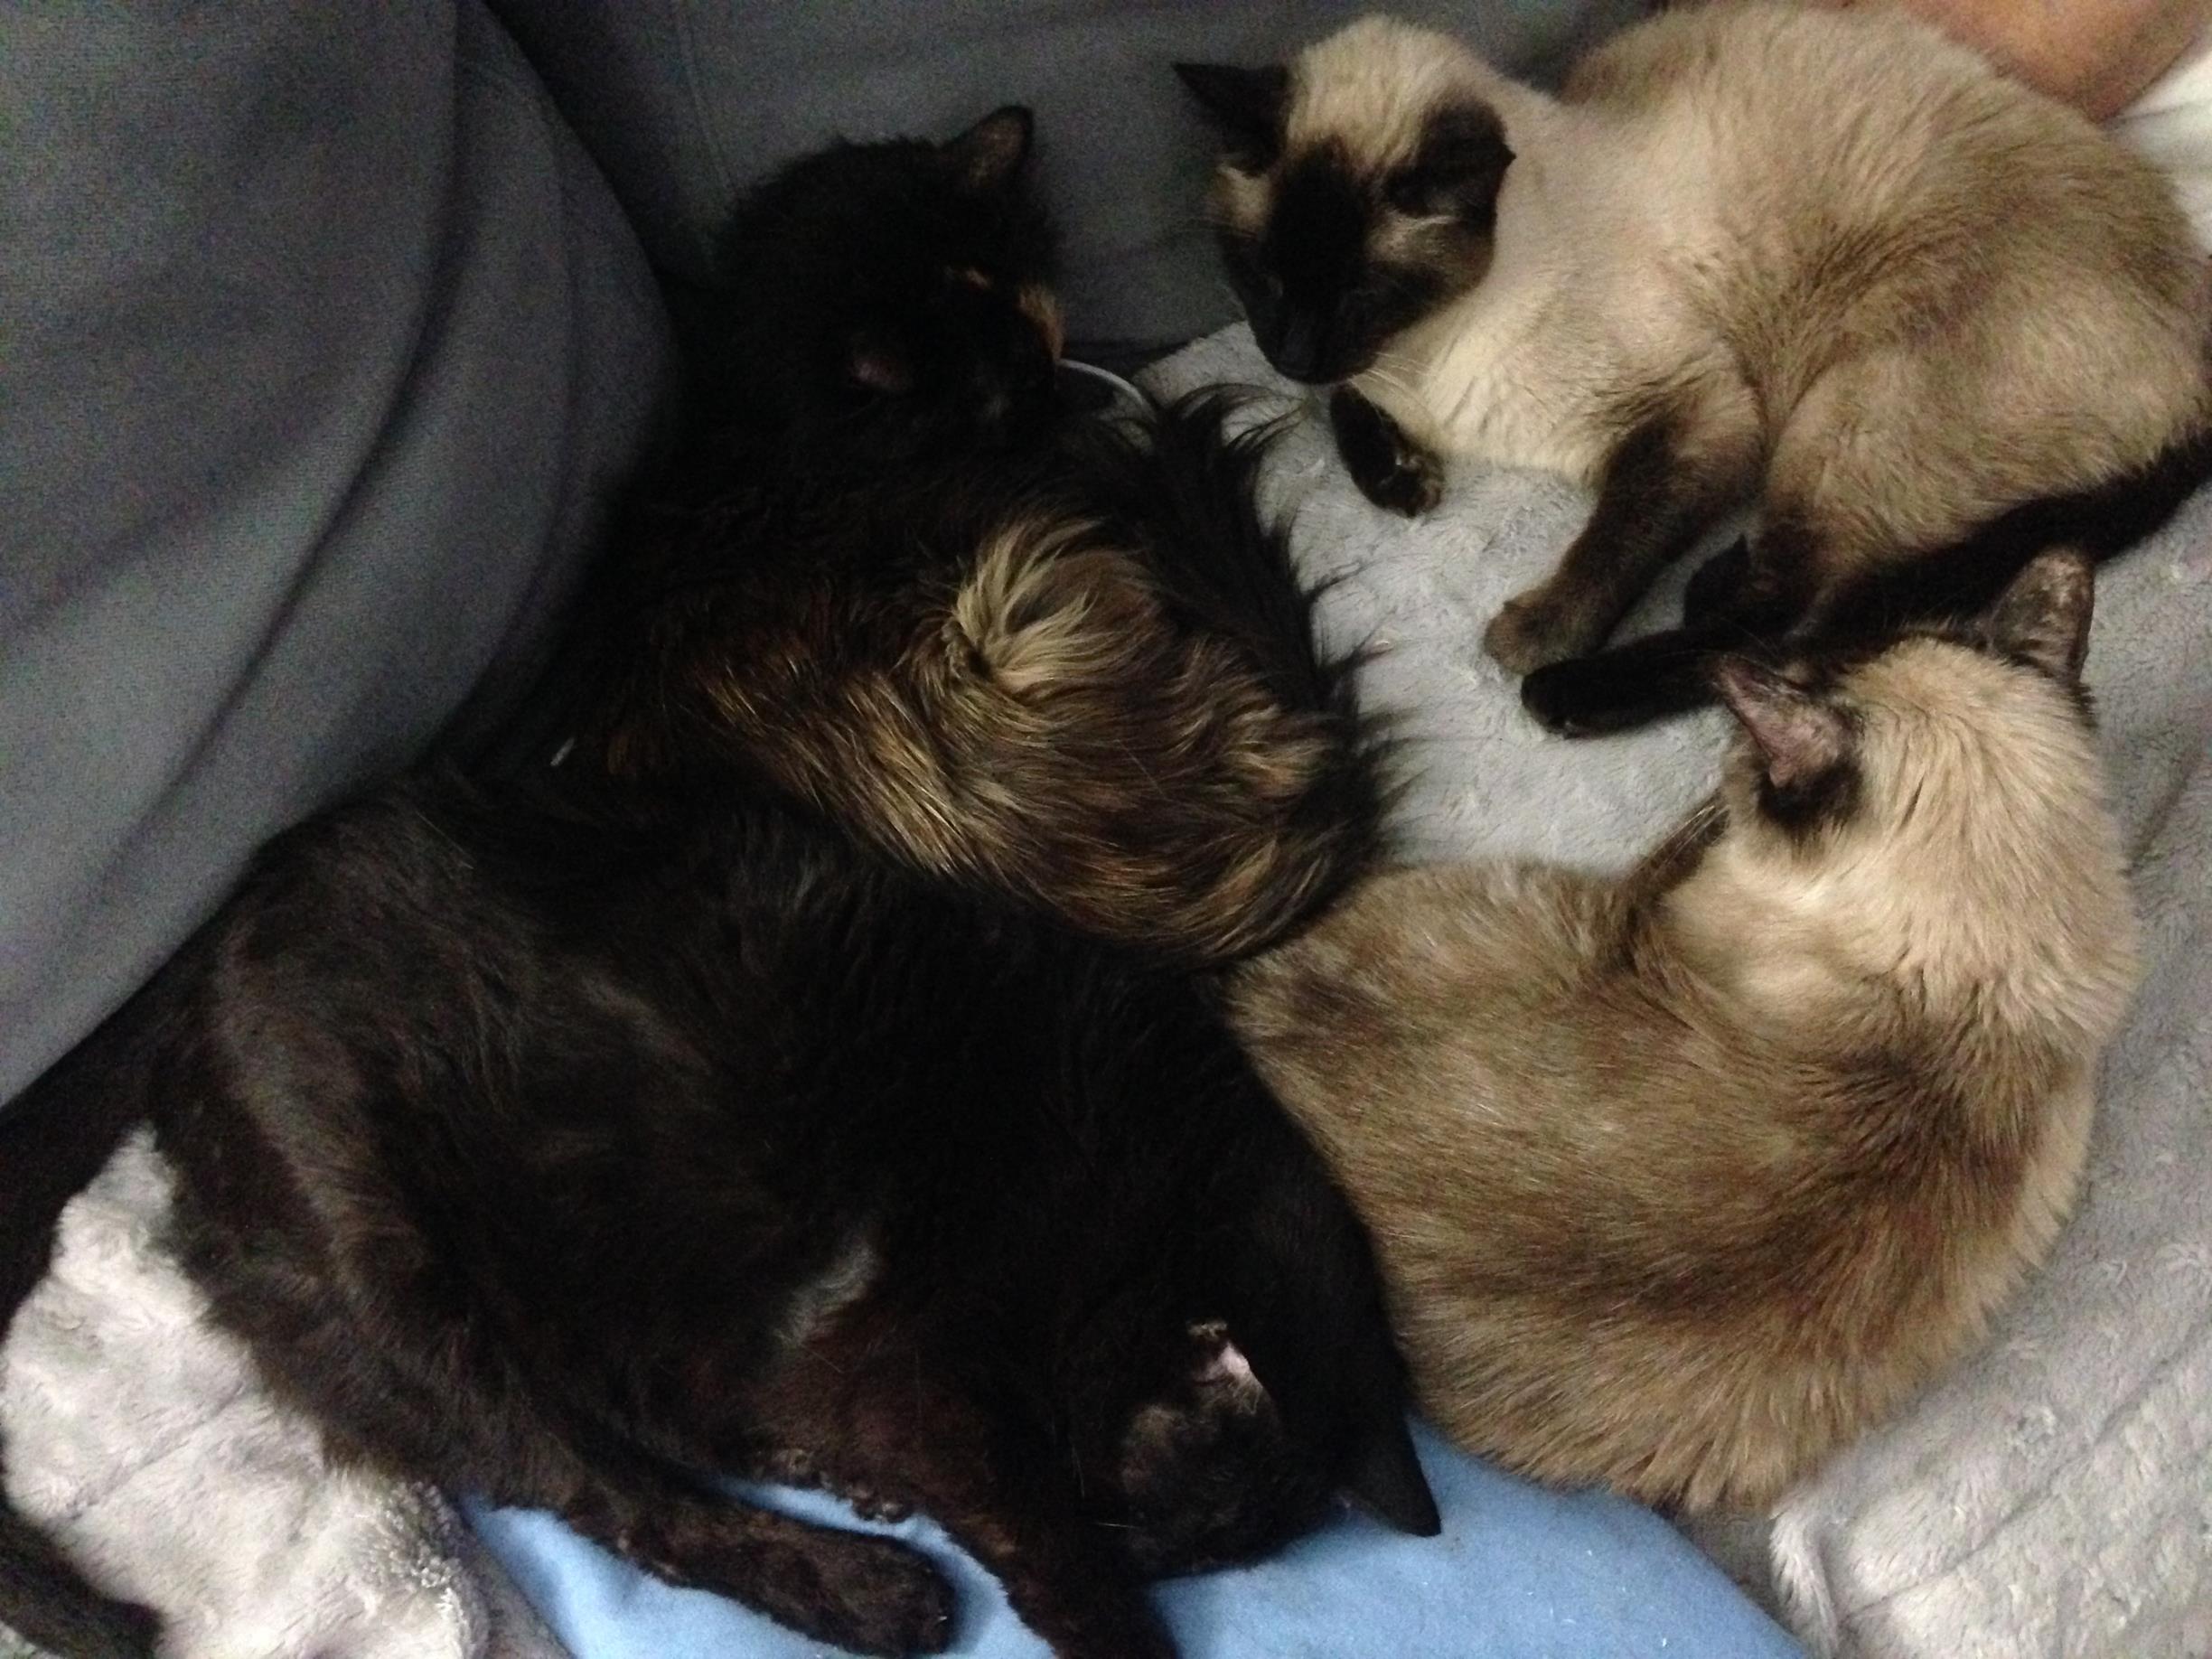 Pile O Cats! Lefty had friends!